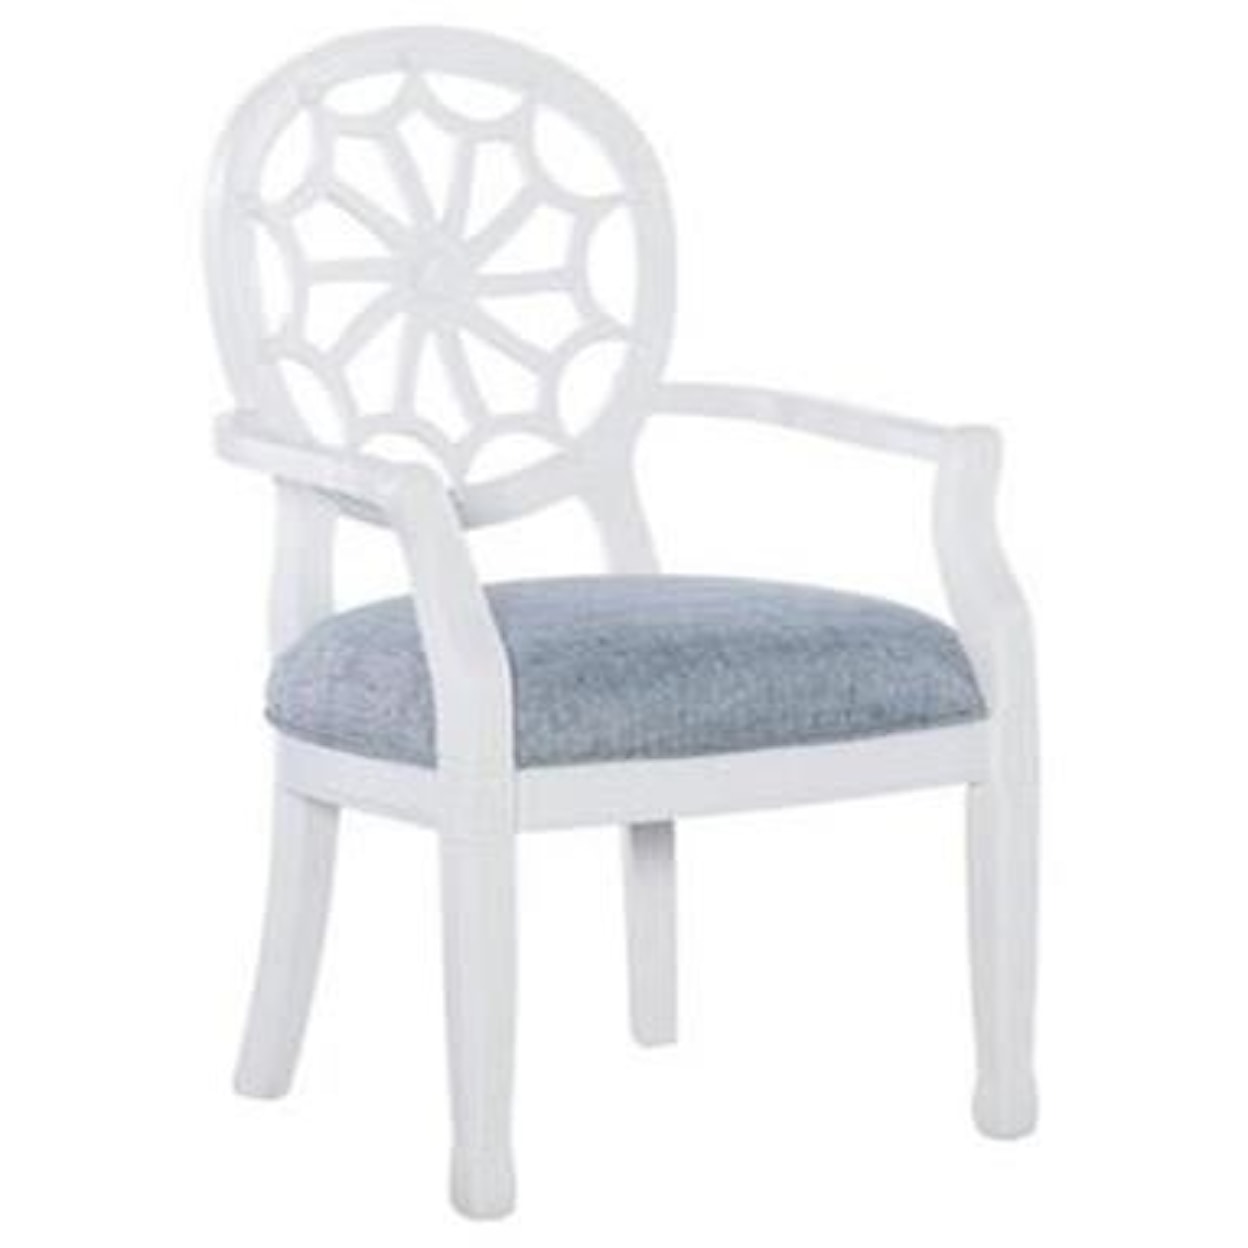 Powell Spider Web Back Accent Chair